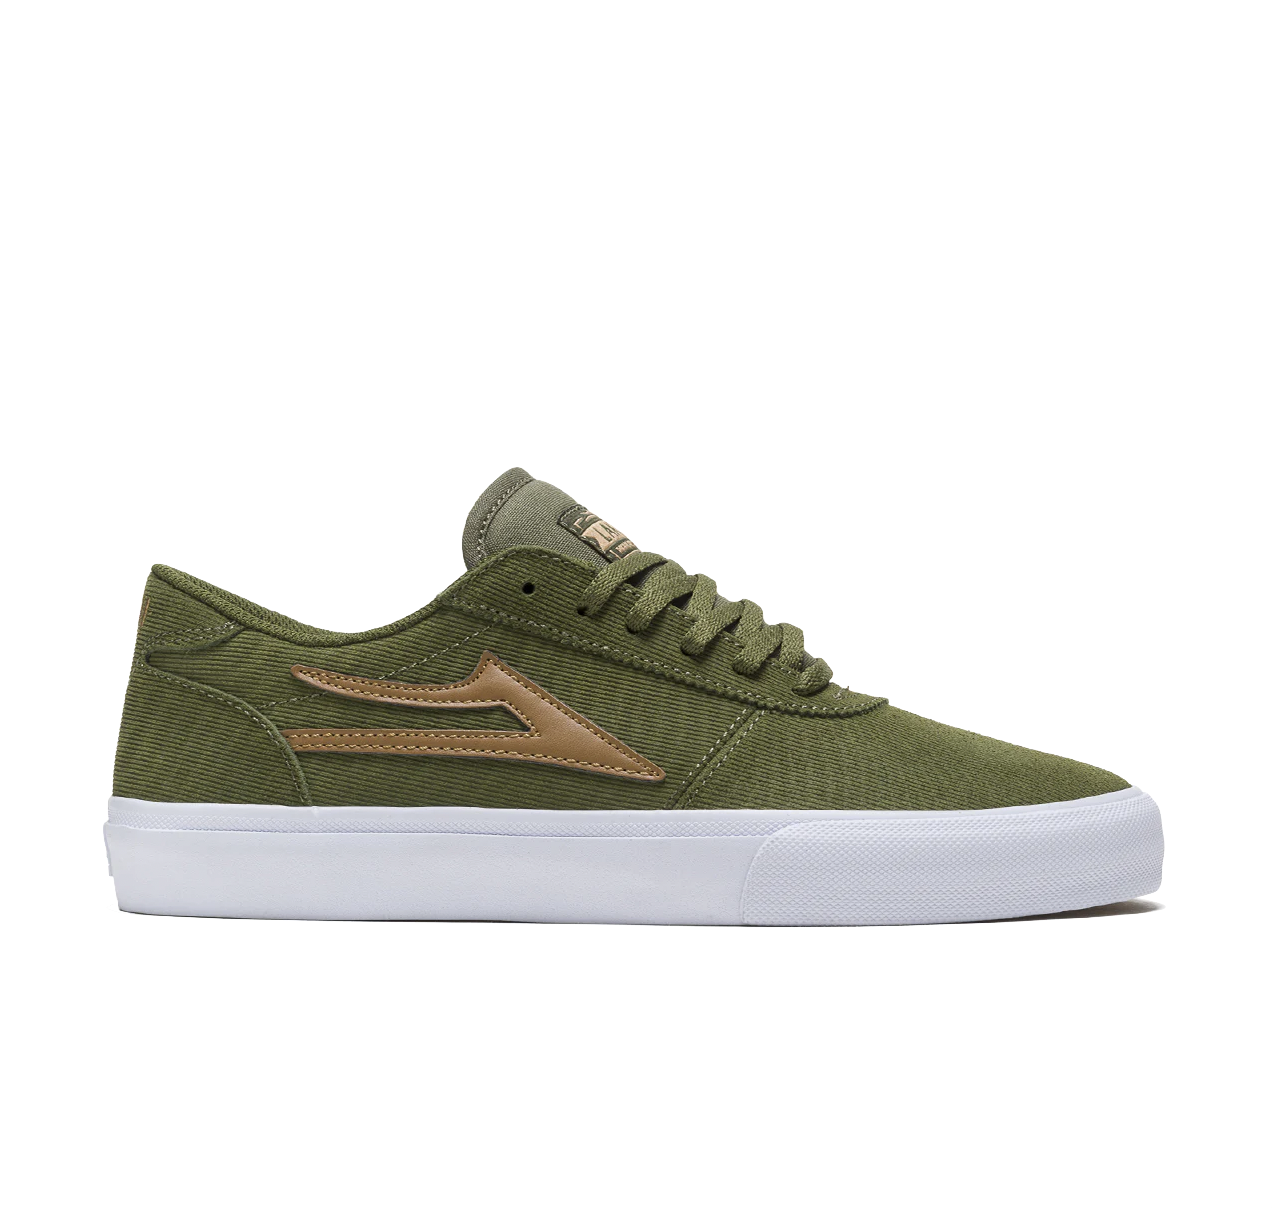 Lakai Manchester olive cord suede